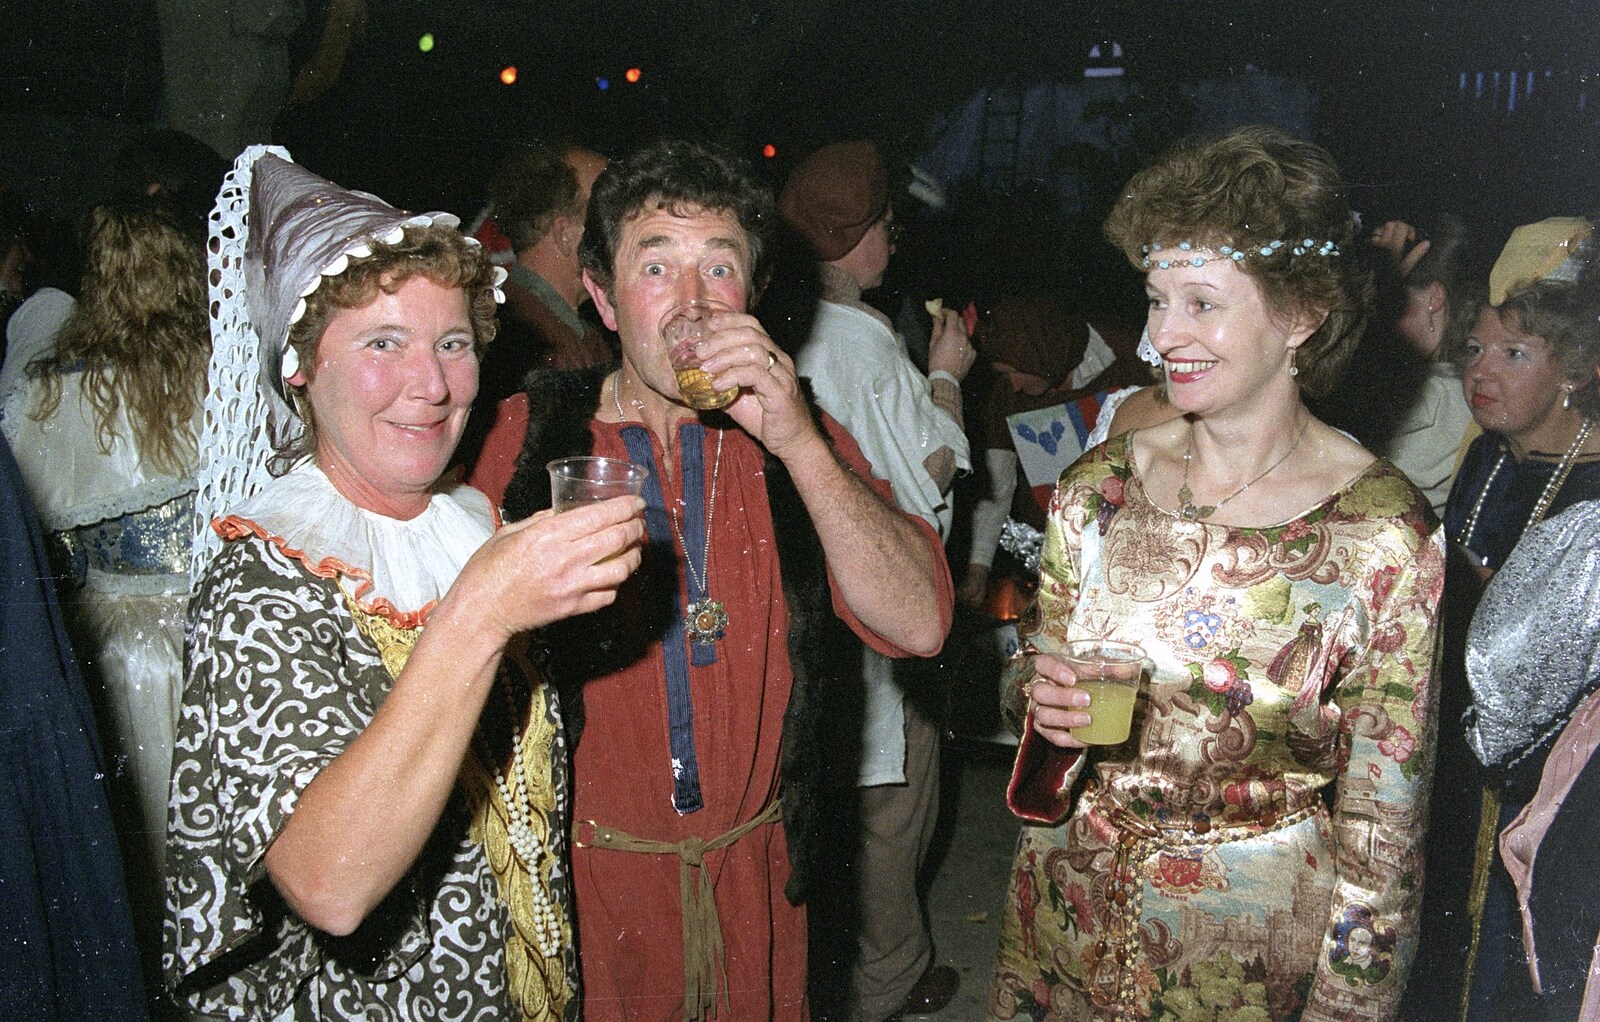 Brenda holds a plastic glass up from A Mediaeval Birthday Party, Starston, Norfolk - 27th July 1990